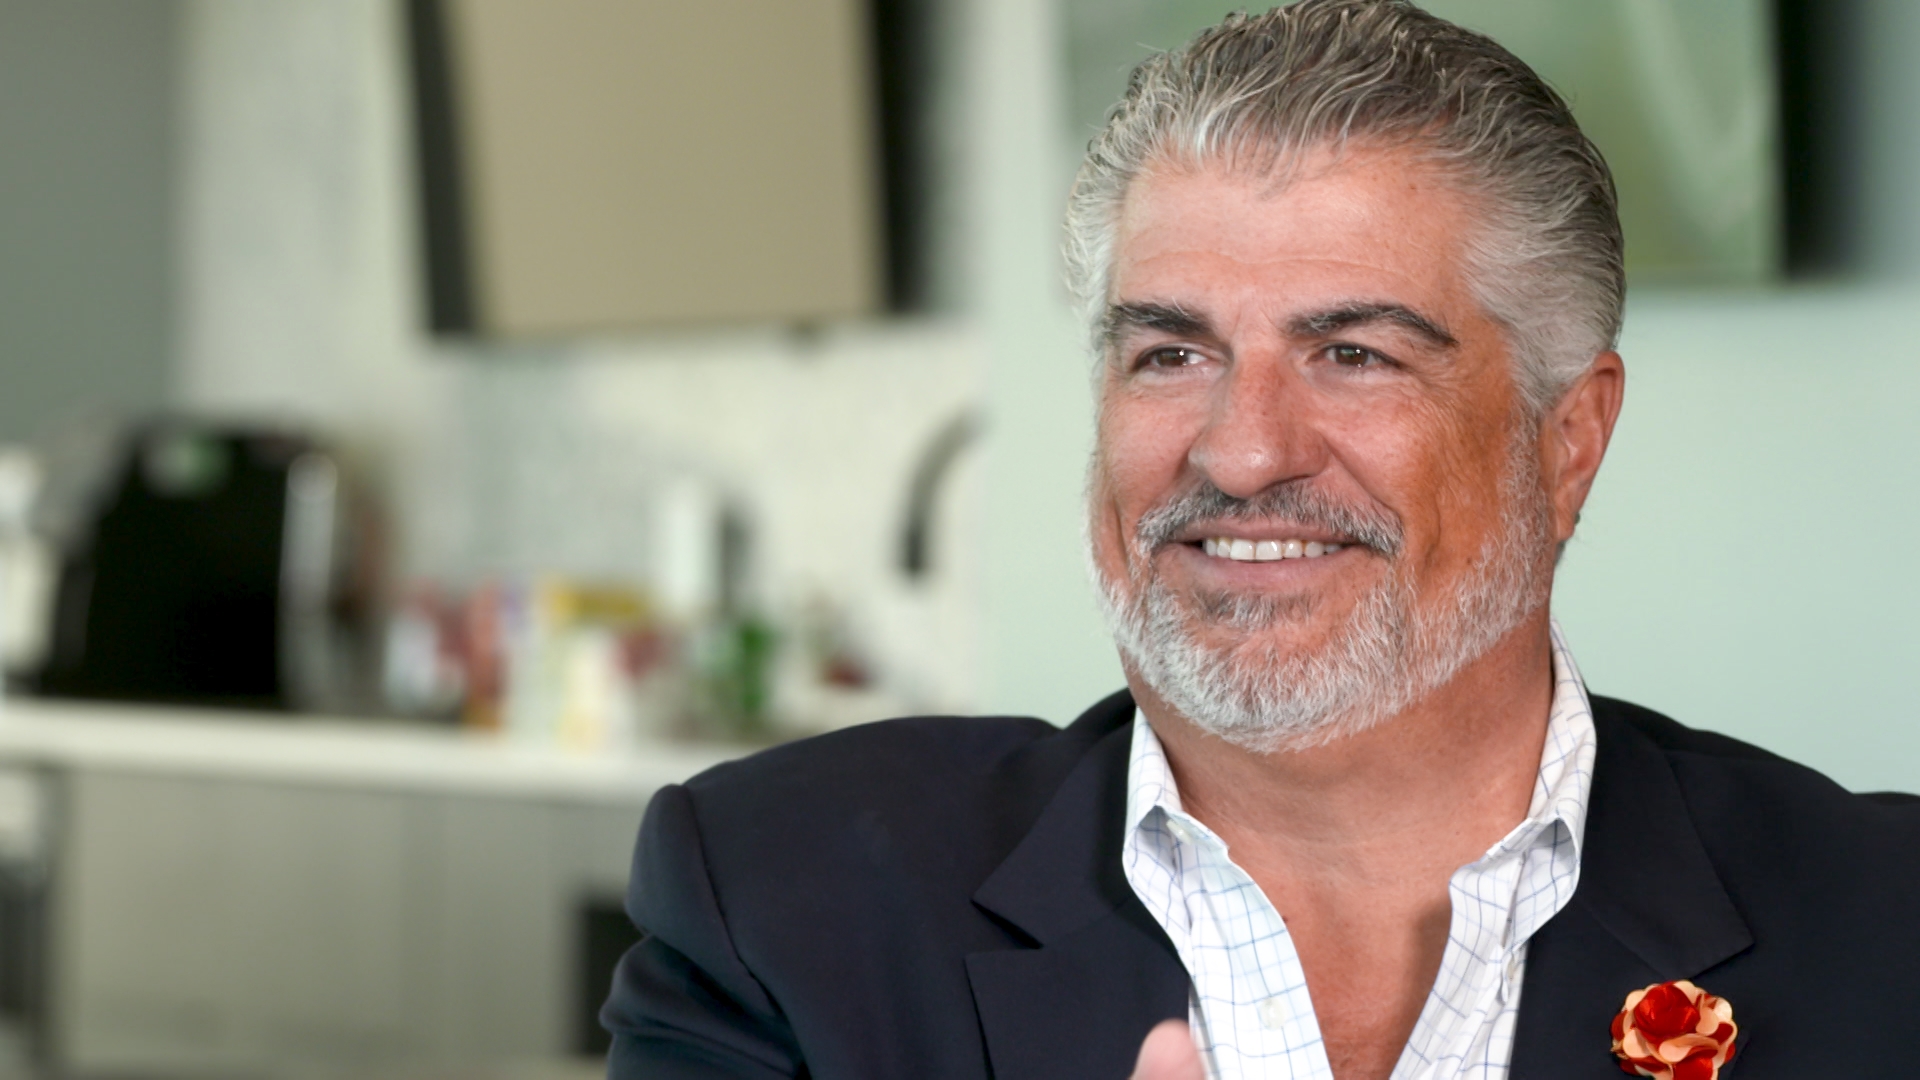 Cacique Foods CEO Gil de Cardenas decided to move his company from California to North Texas. In this interview, he explains that decision.